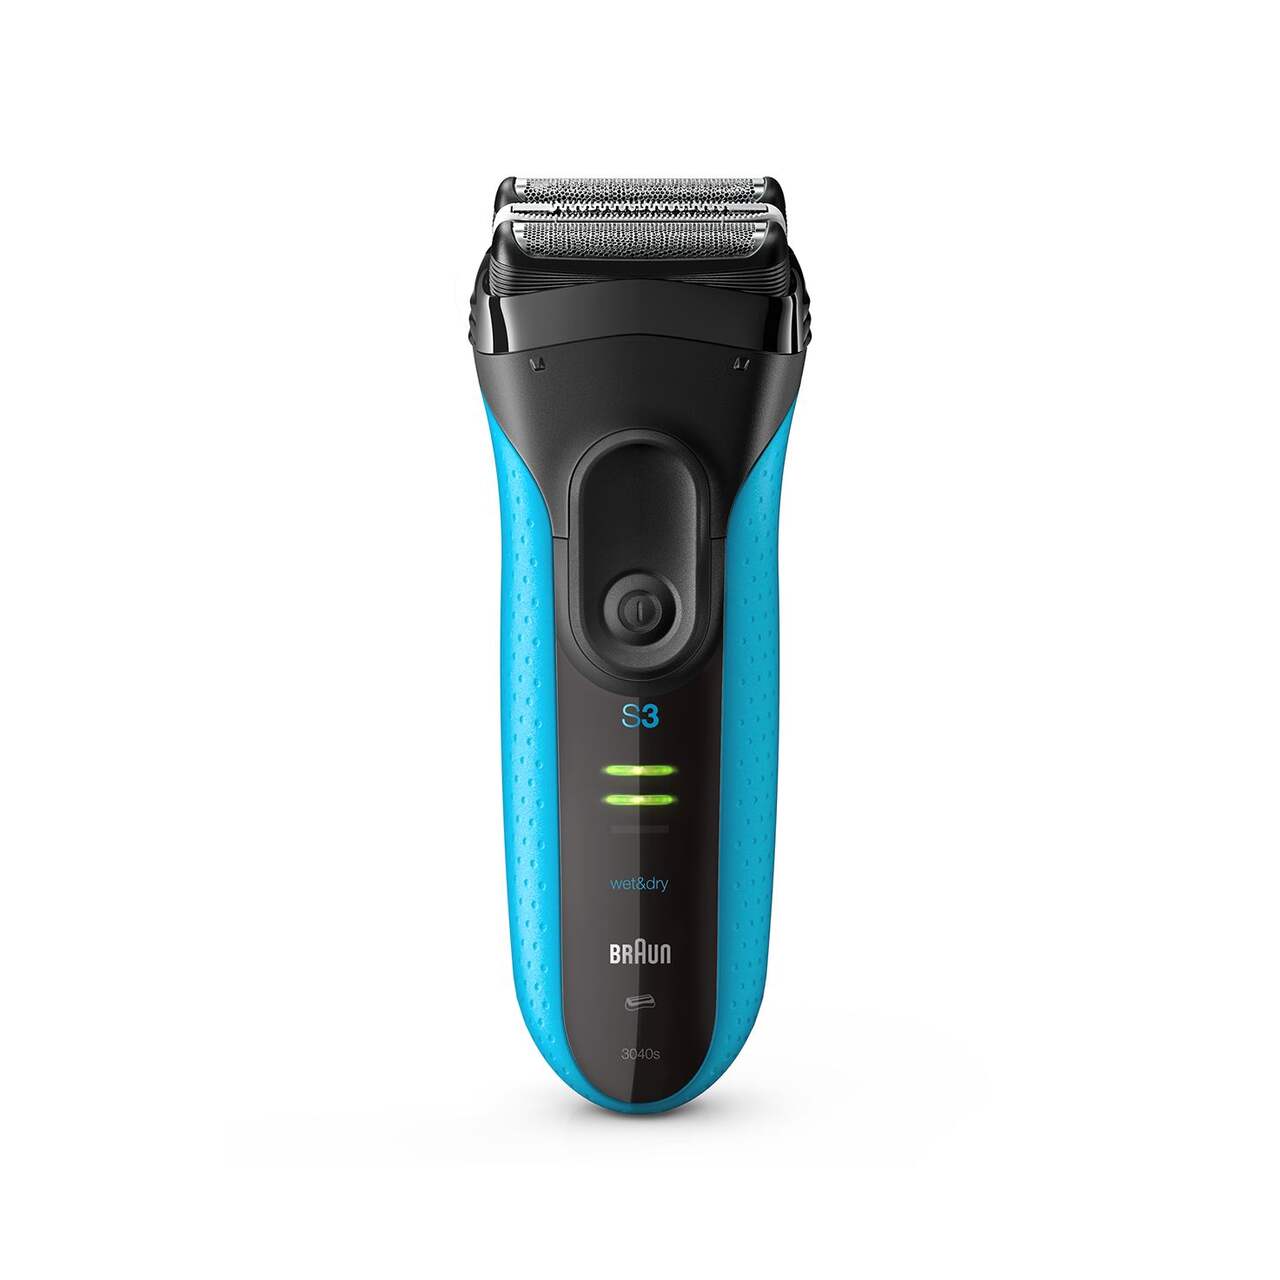 https://media-www.canadiantire.ca/product/living/personal-garment-care/personal-care/0438768/braun-series-3-3040-shaver-9c1e3734-0a85-4fde-a98d-1eb8acd06cca-jpgrendition.jpg?imdensity=1&imwidth=640&impolicy=mZoom